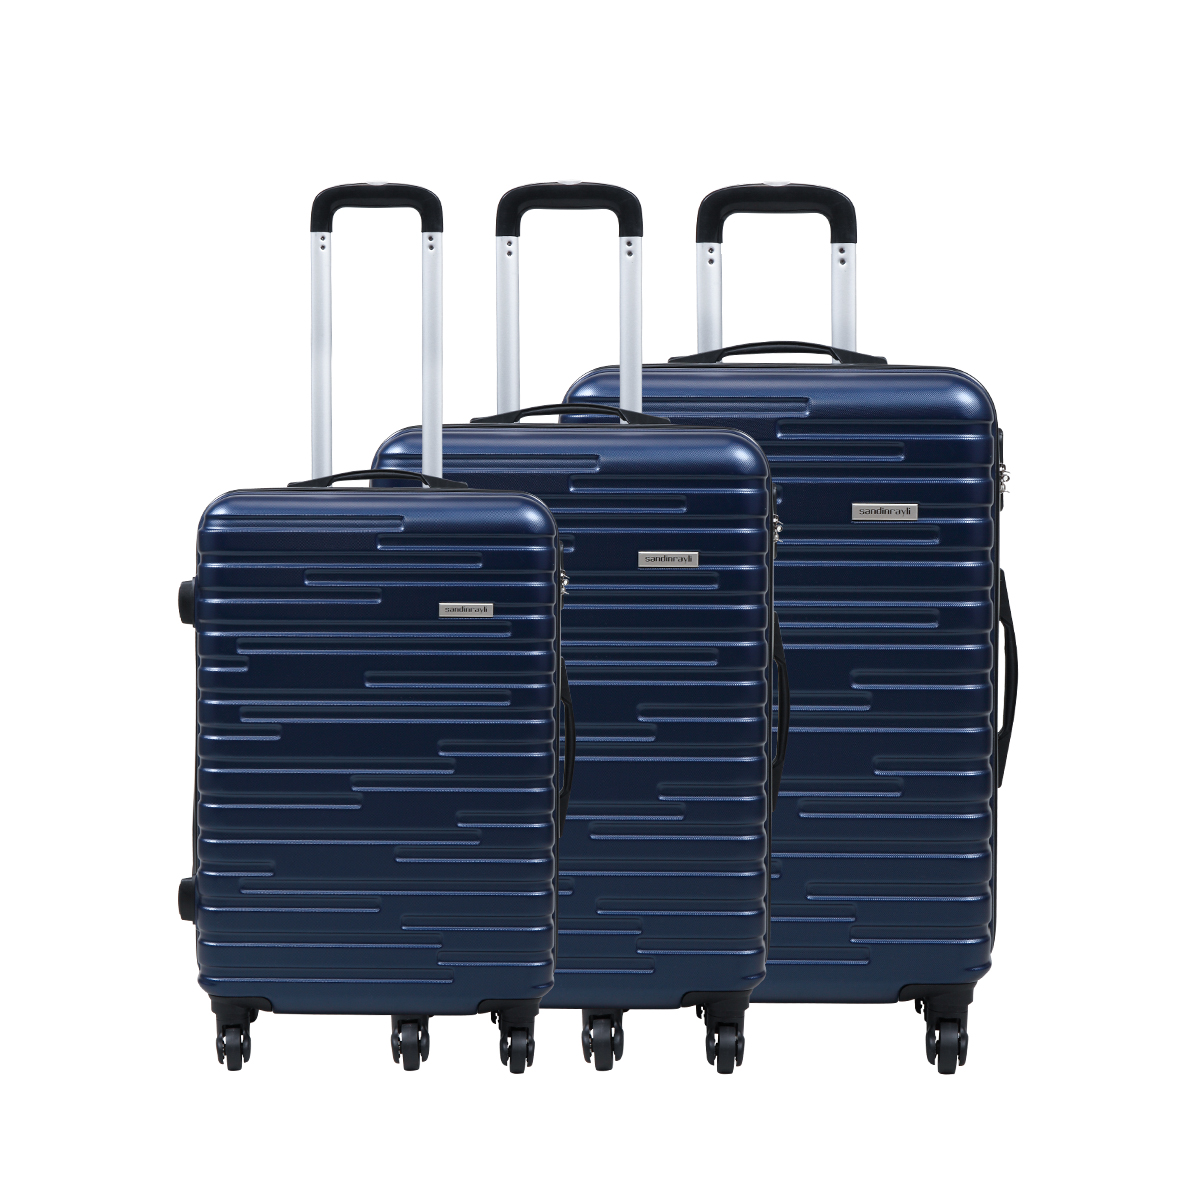 sandinrayli 3 PCS Luggage Set with Spinner Wheels Coded Lock Suitcases Travel Rolling Trolley ABS Hard Side  Luggage , Hard Shell